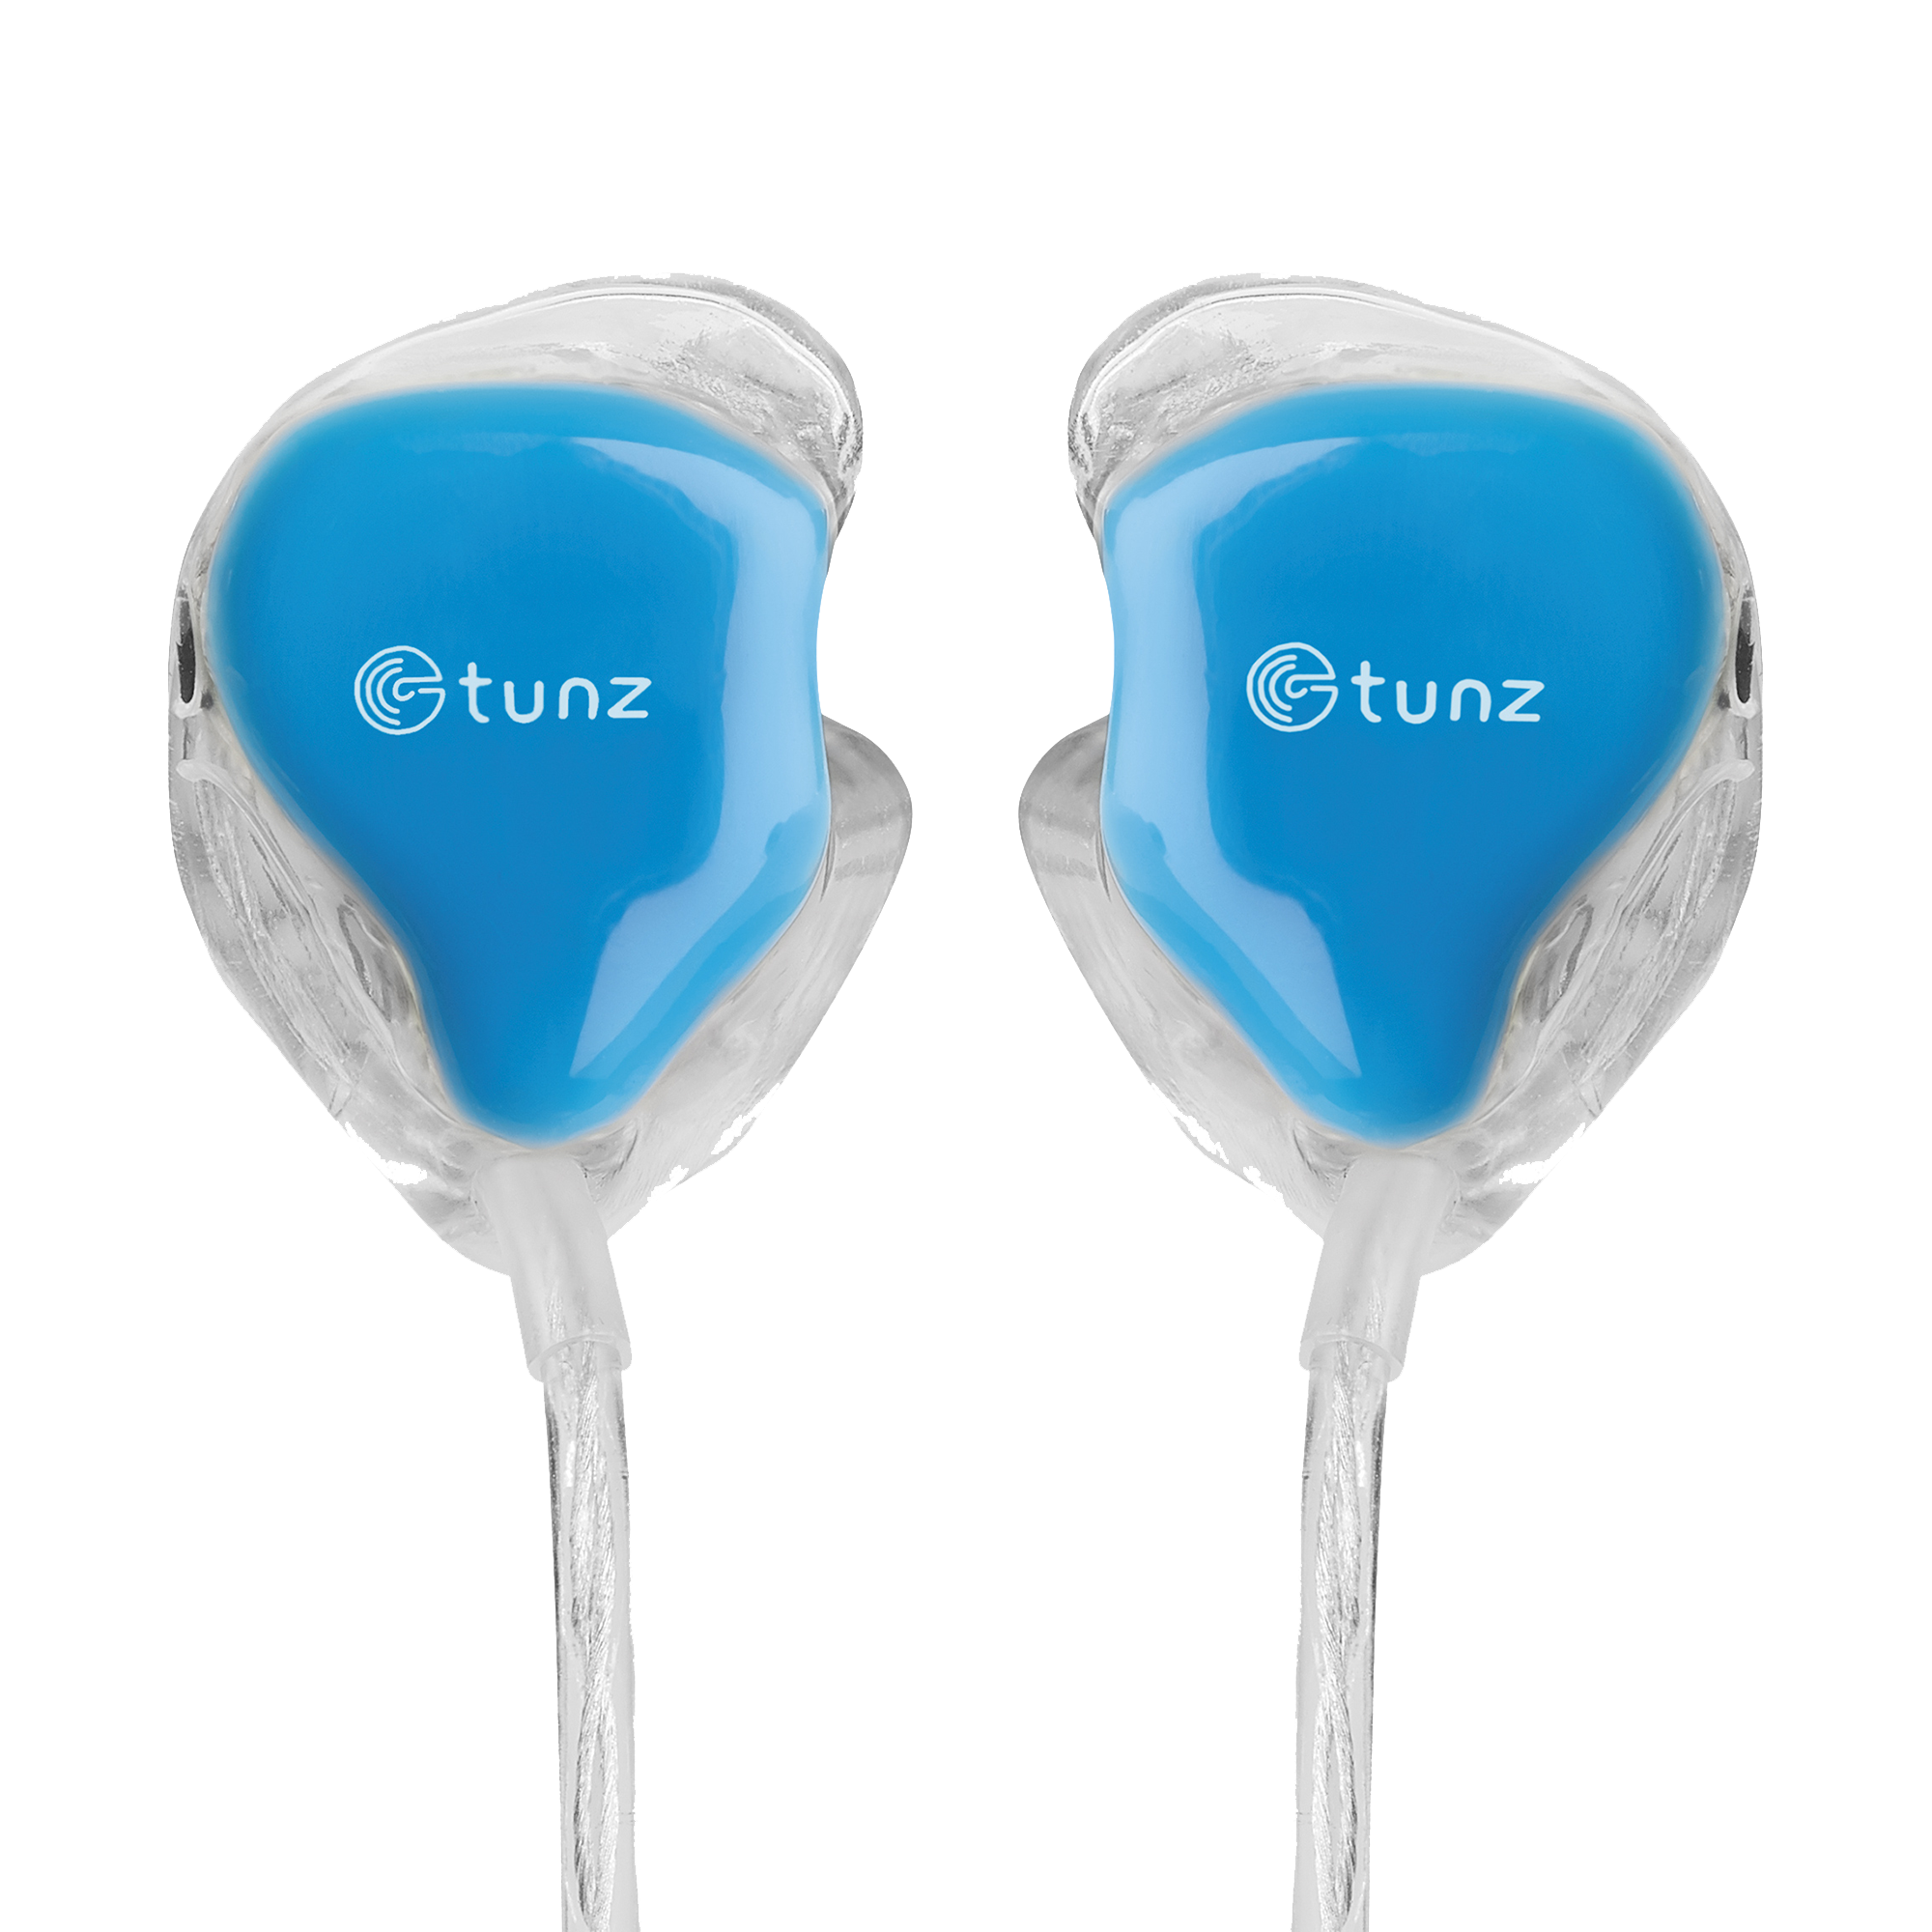 Tunz Hearing Protection Duo